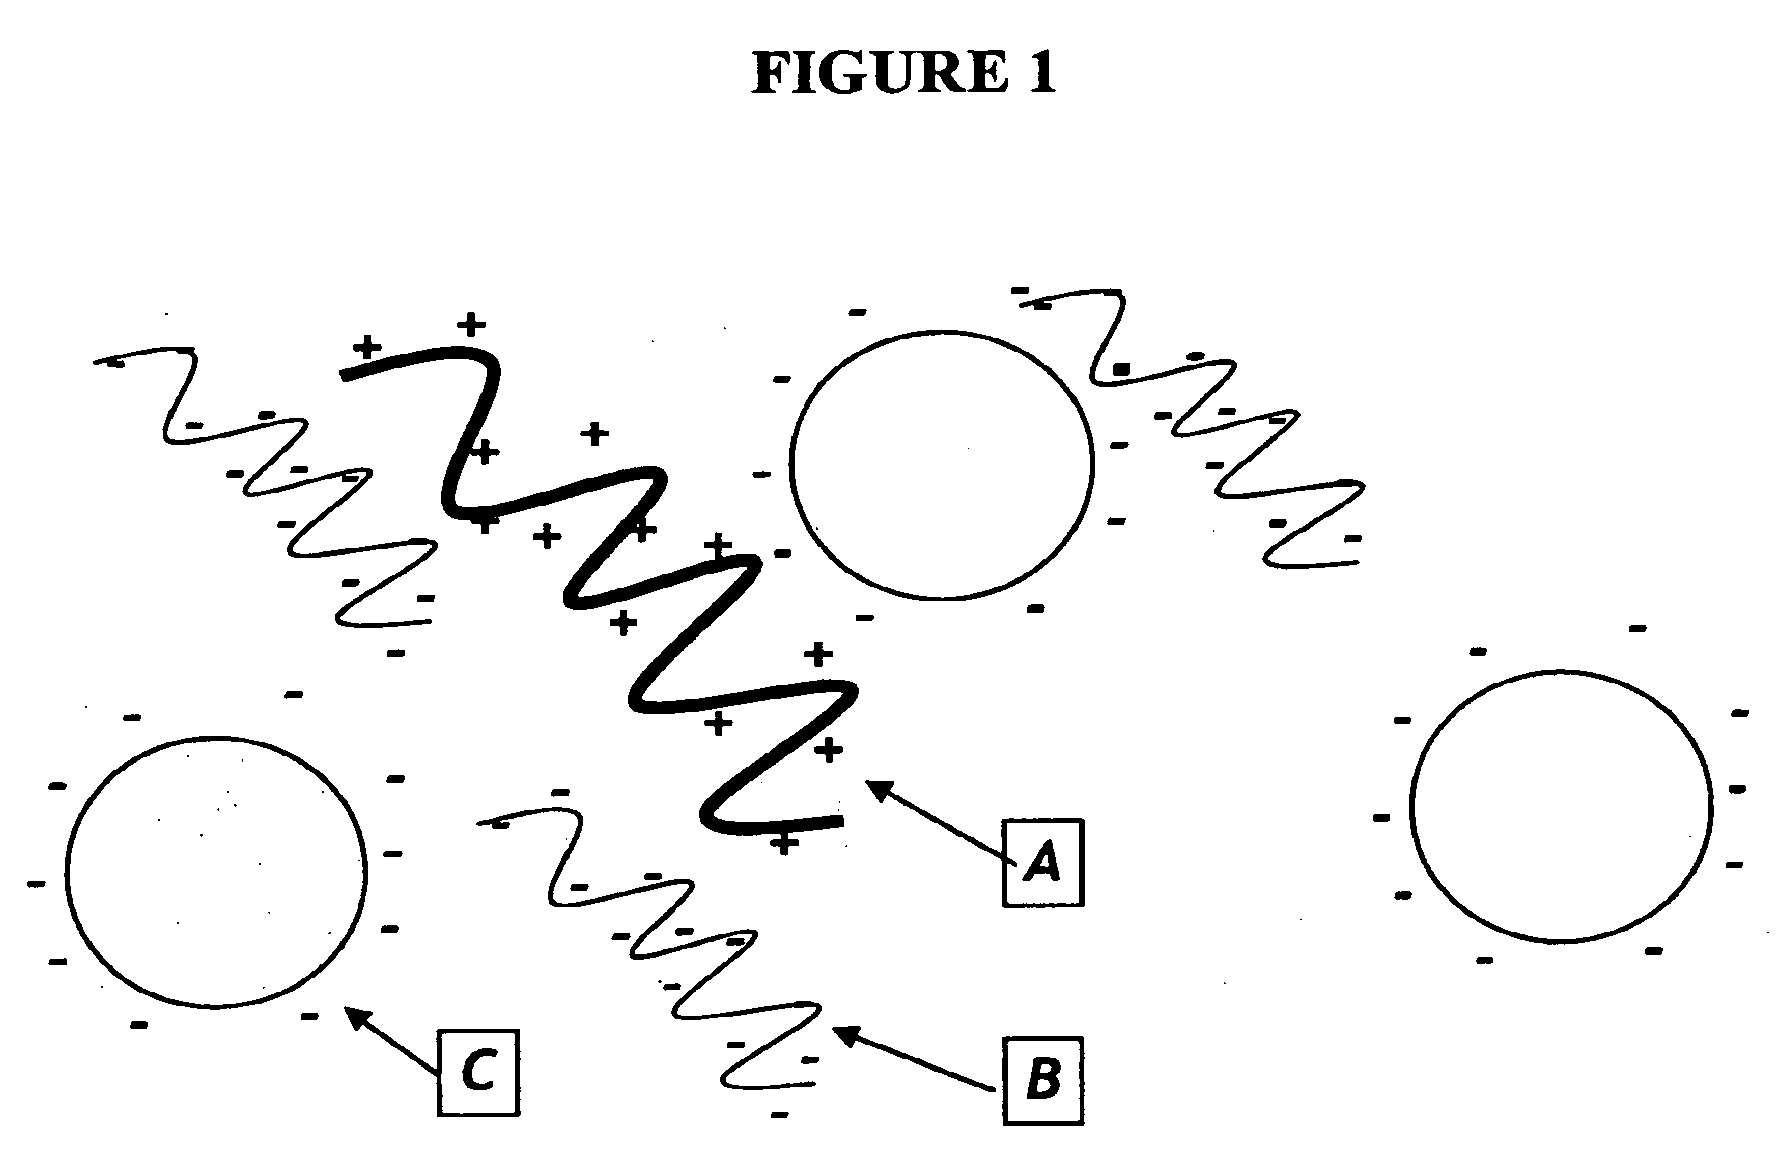 Nucleic acid separation and purification method based on reversible charge interactions